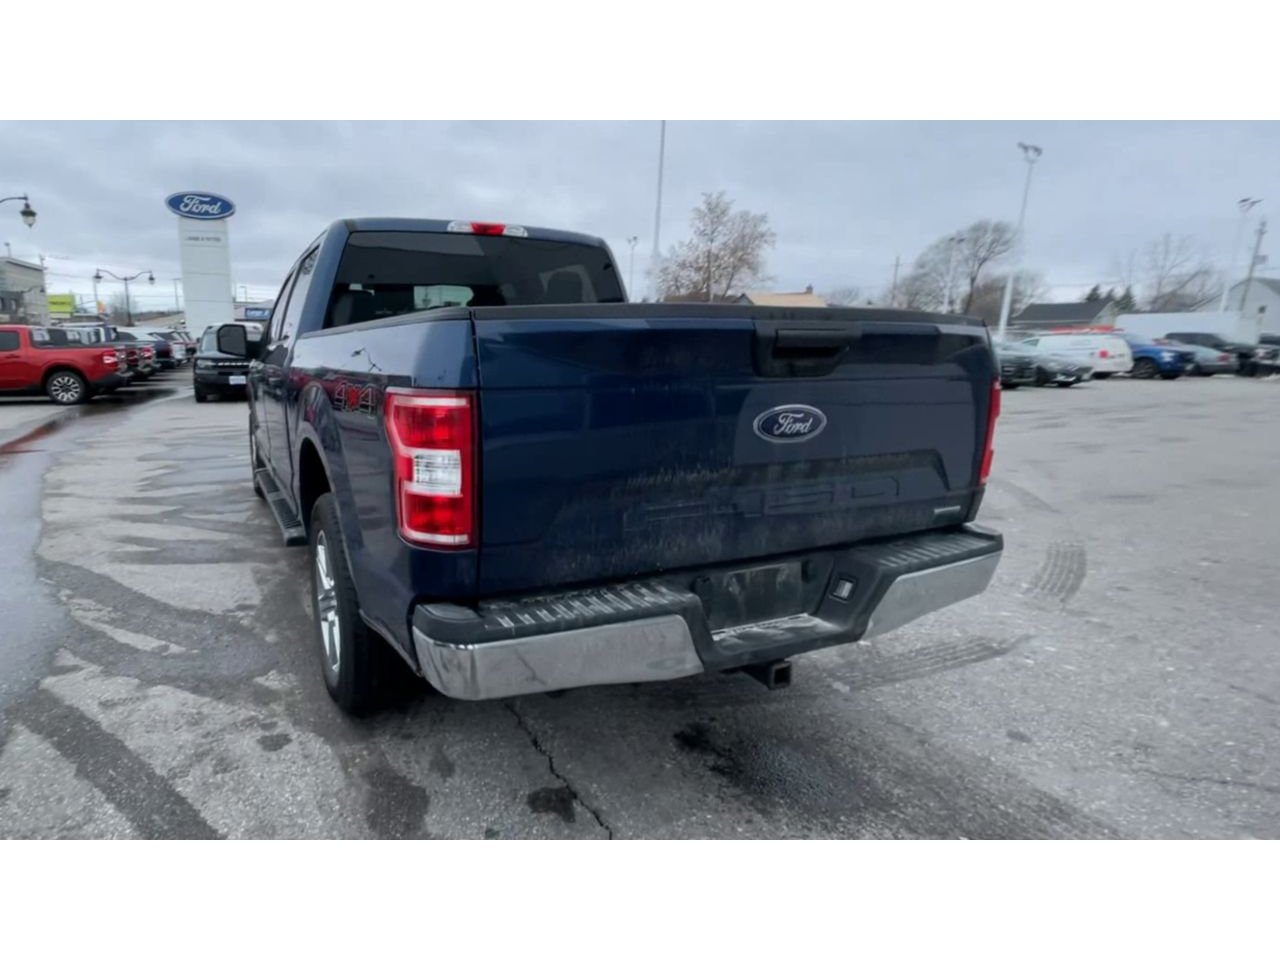 2020 Ford F-150 - P21445A Full Image 7